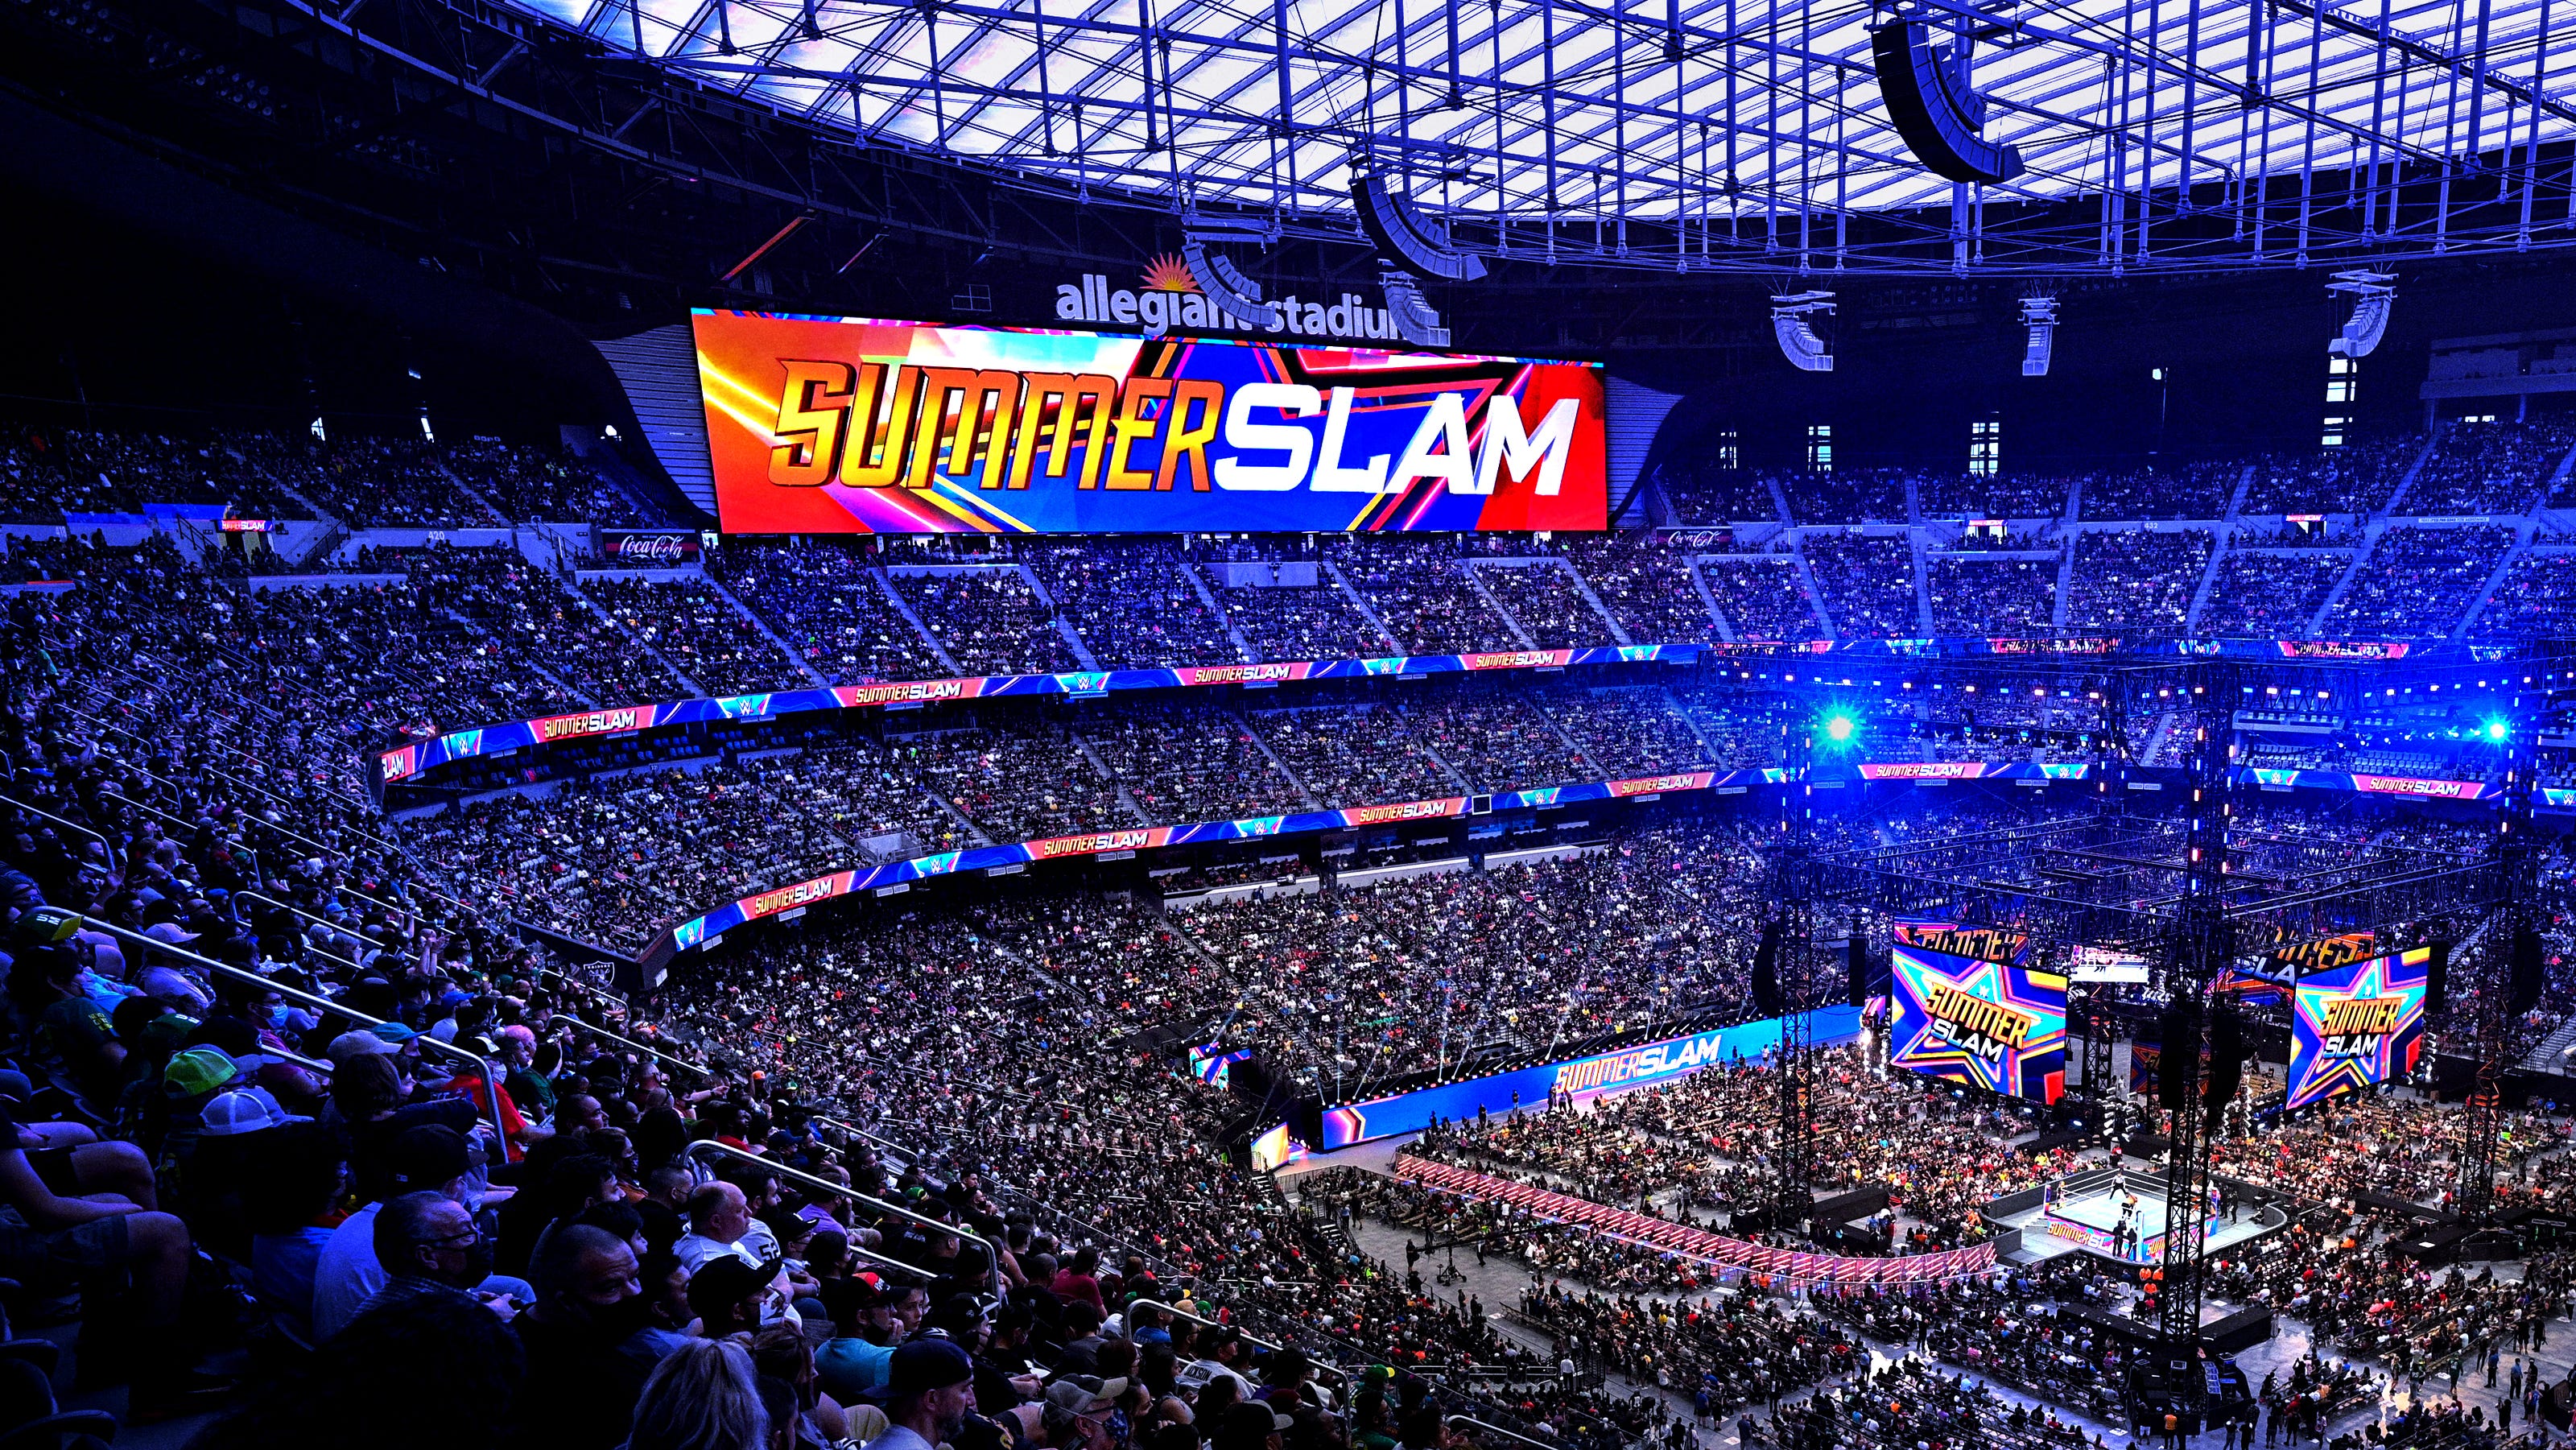 What to know about WWE SummerSlam in Nashville this weekend